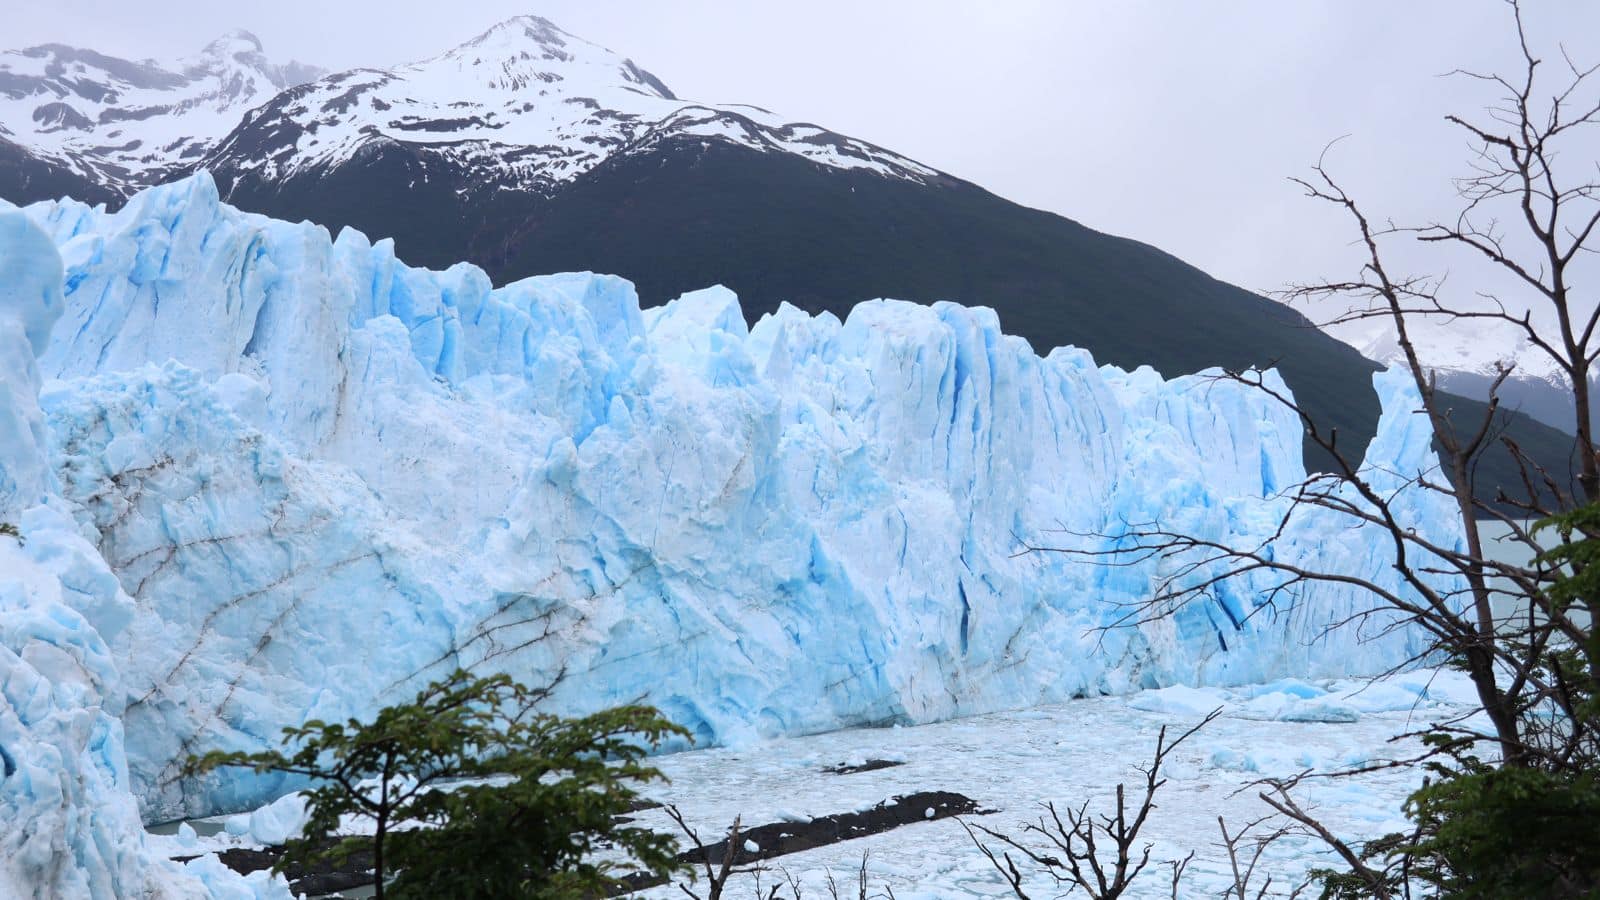 Take a journey into the pristine wilderness of Patagonia, Argentina